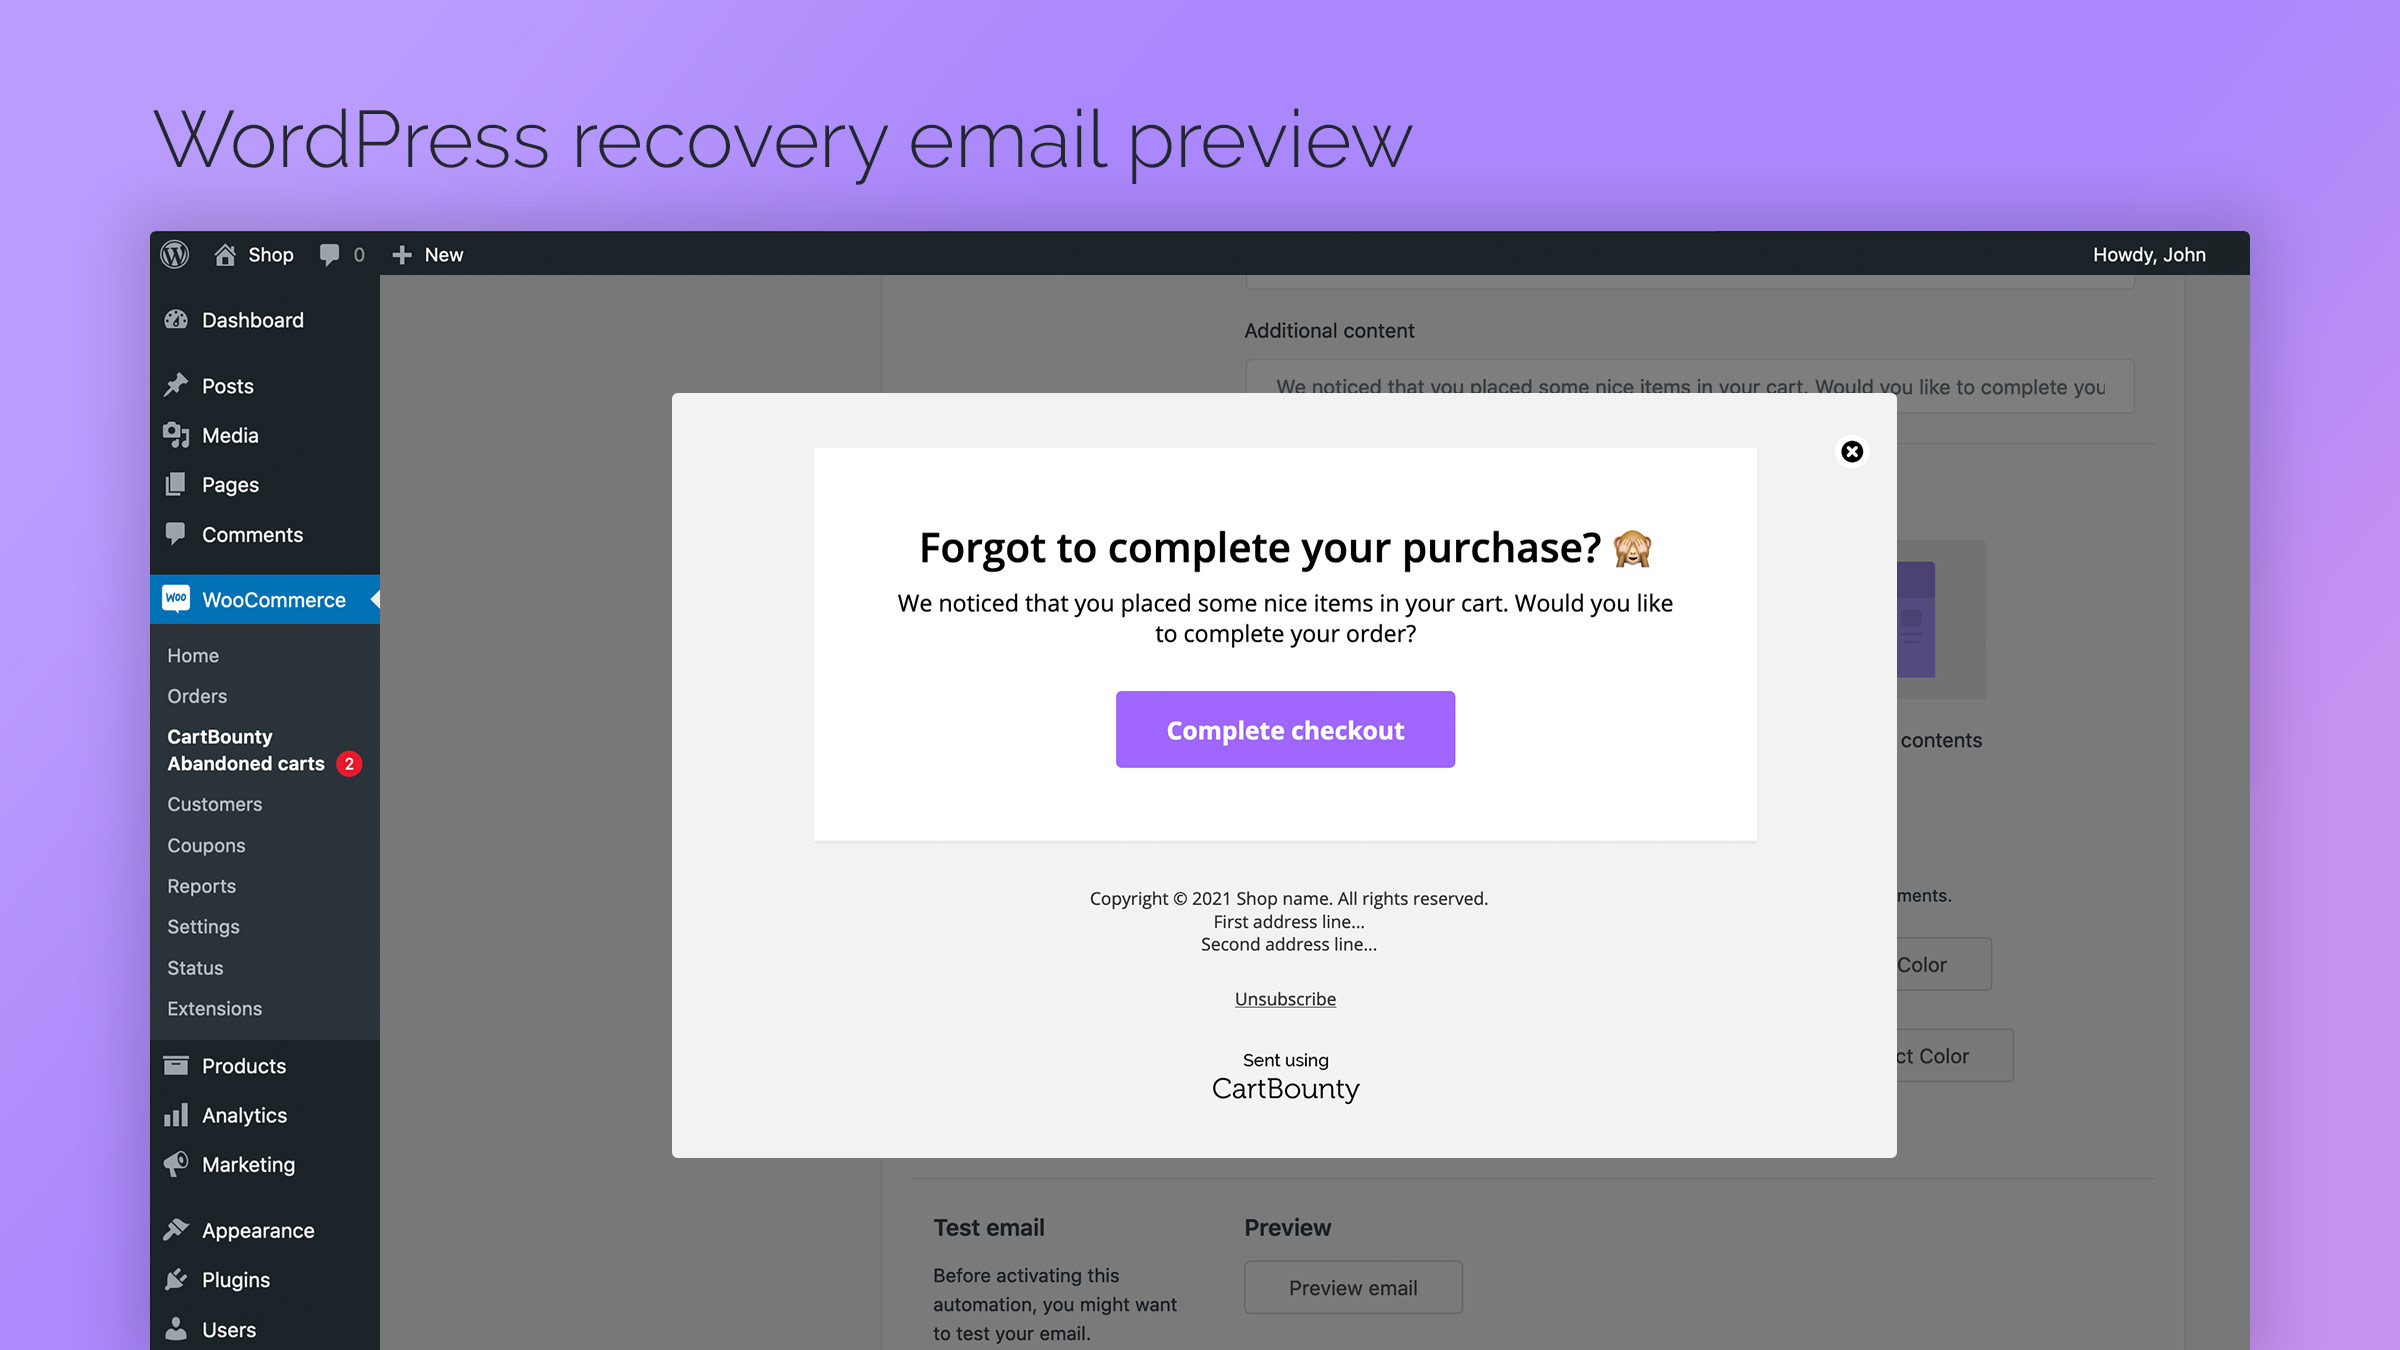 WordPress recovery email preview